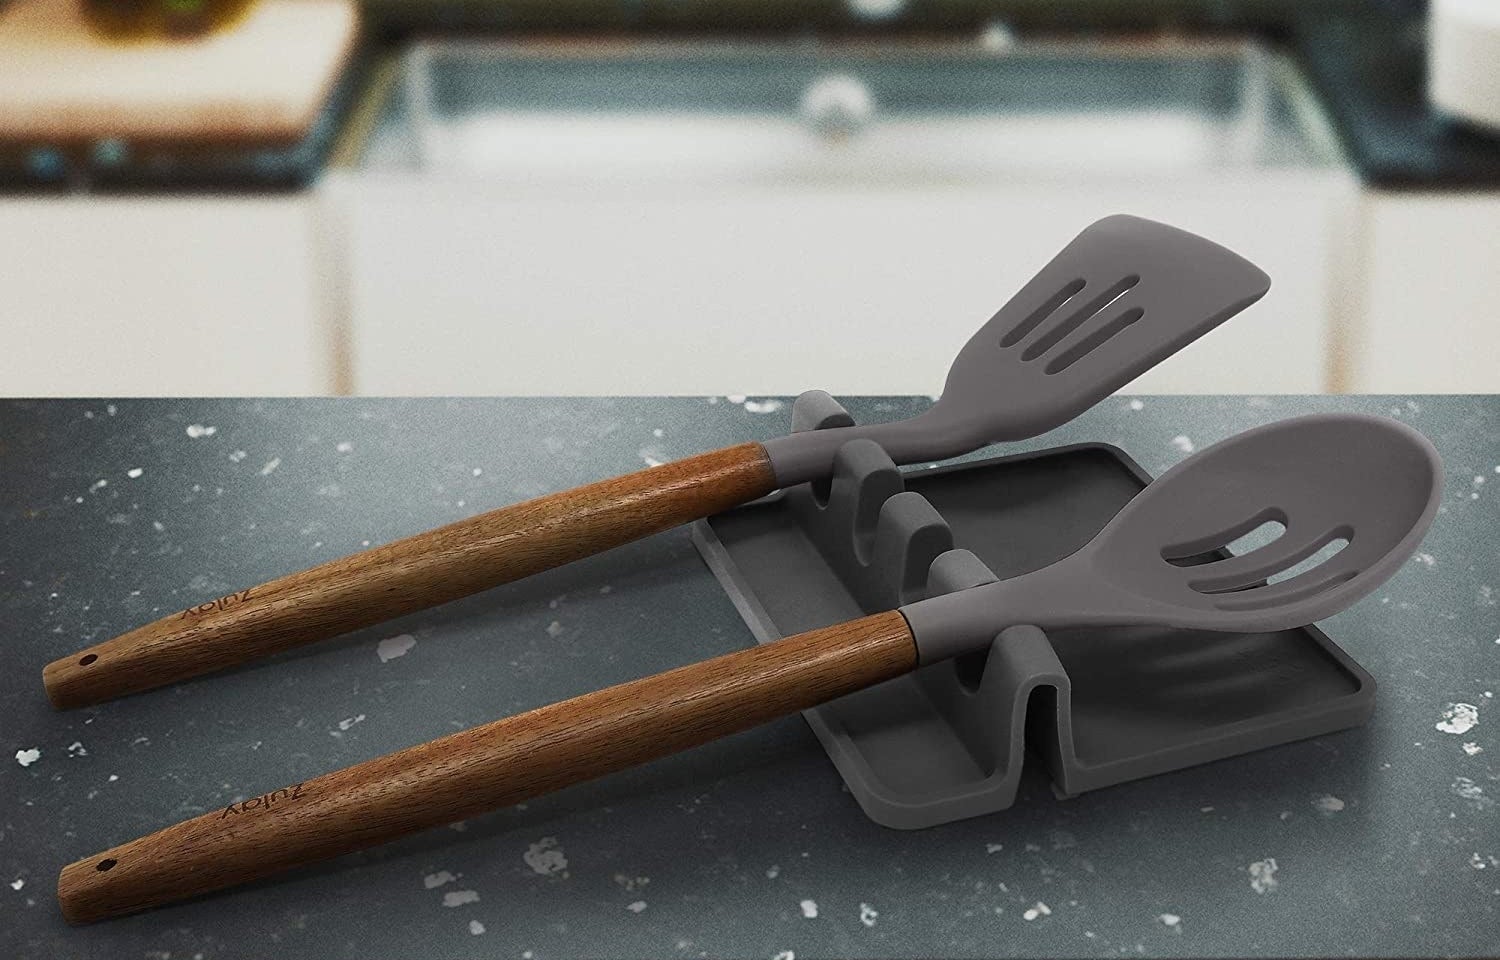 a spatula and a slotted spoon on the holder